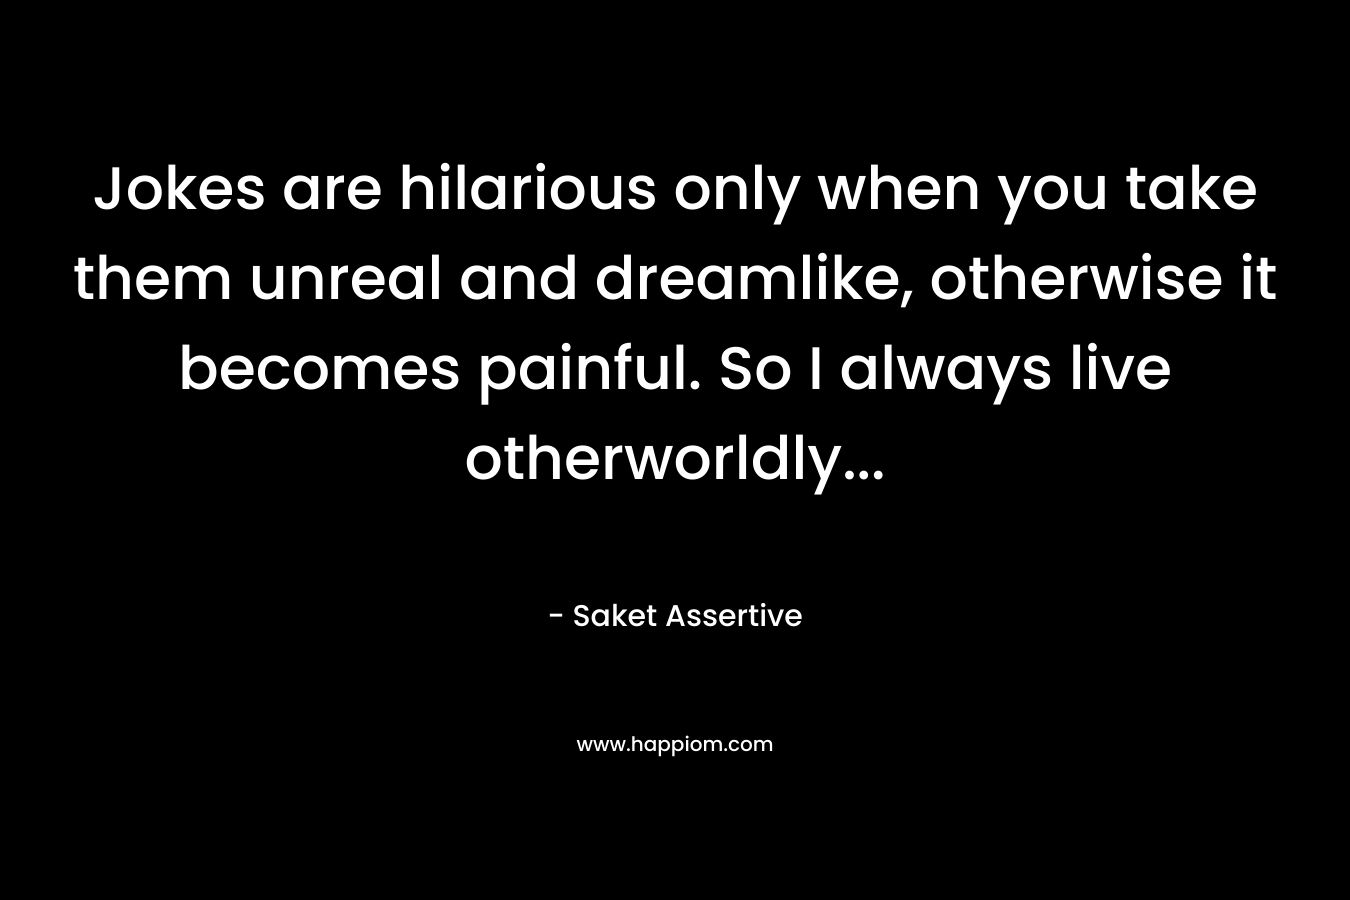 Jokes are hilarious only when you take them unreal and dreamlike, otherwise it becomes painful. So I always live otherworldly… – Saket Assertive